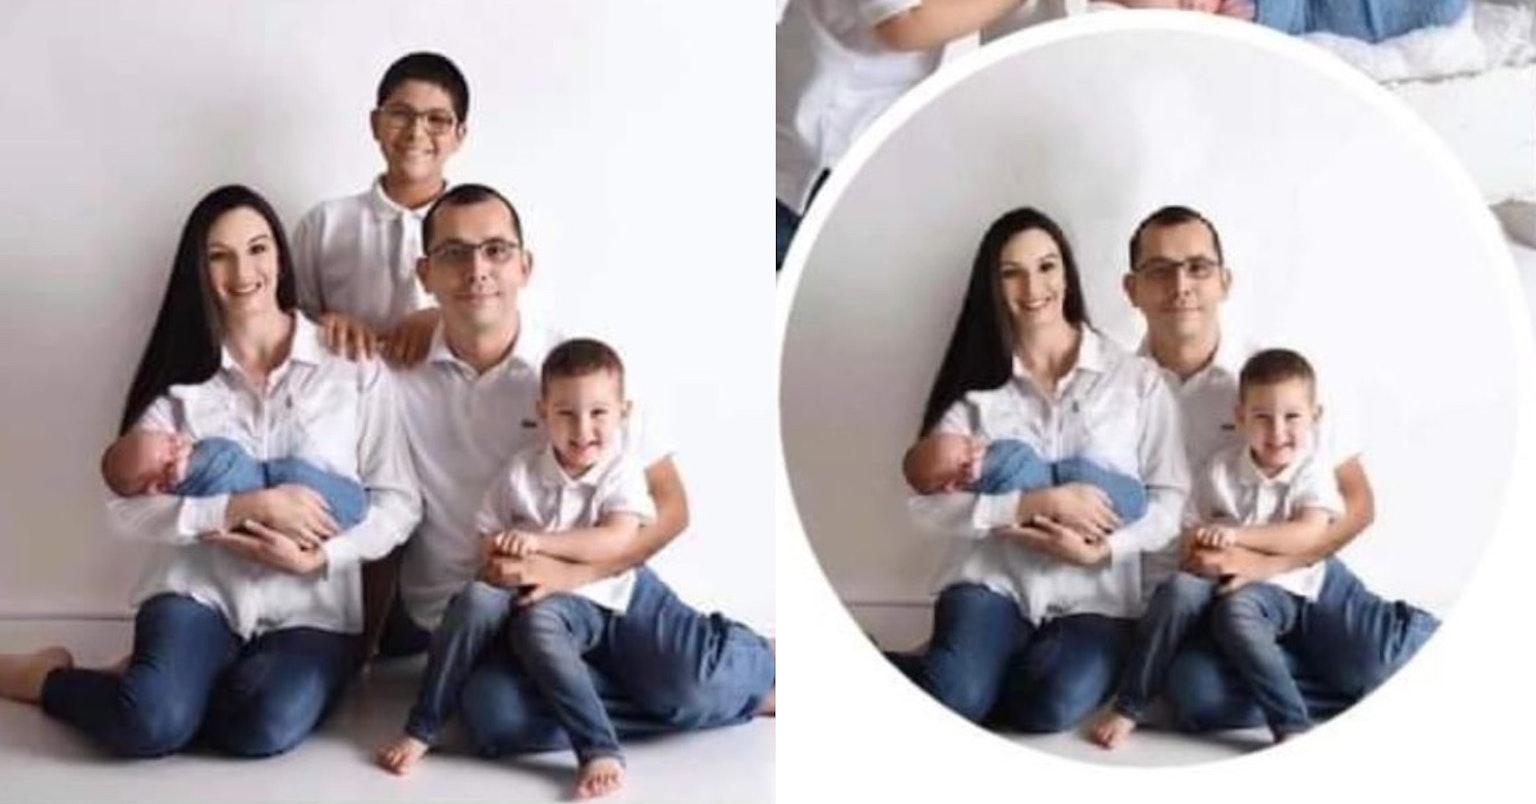 Stepmoms Request To Photoshop Stepson Out Of Family Photo Draws Outrage